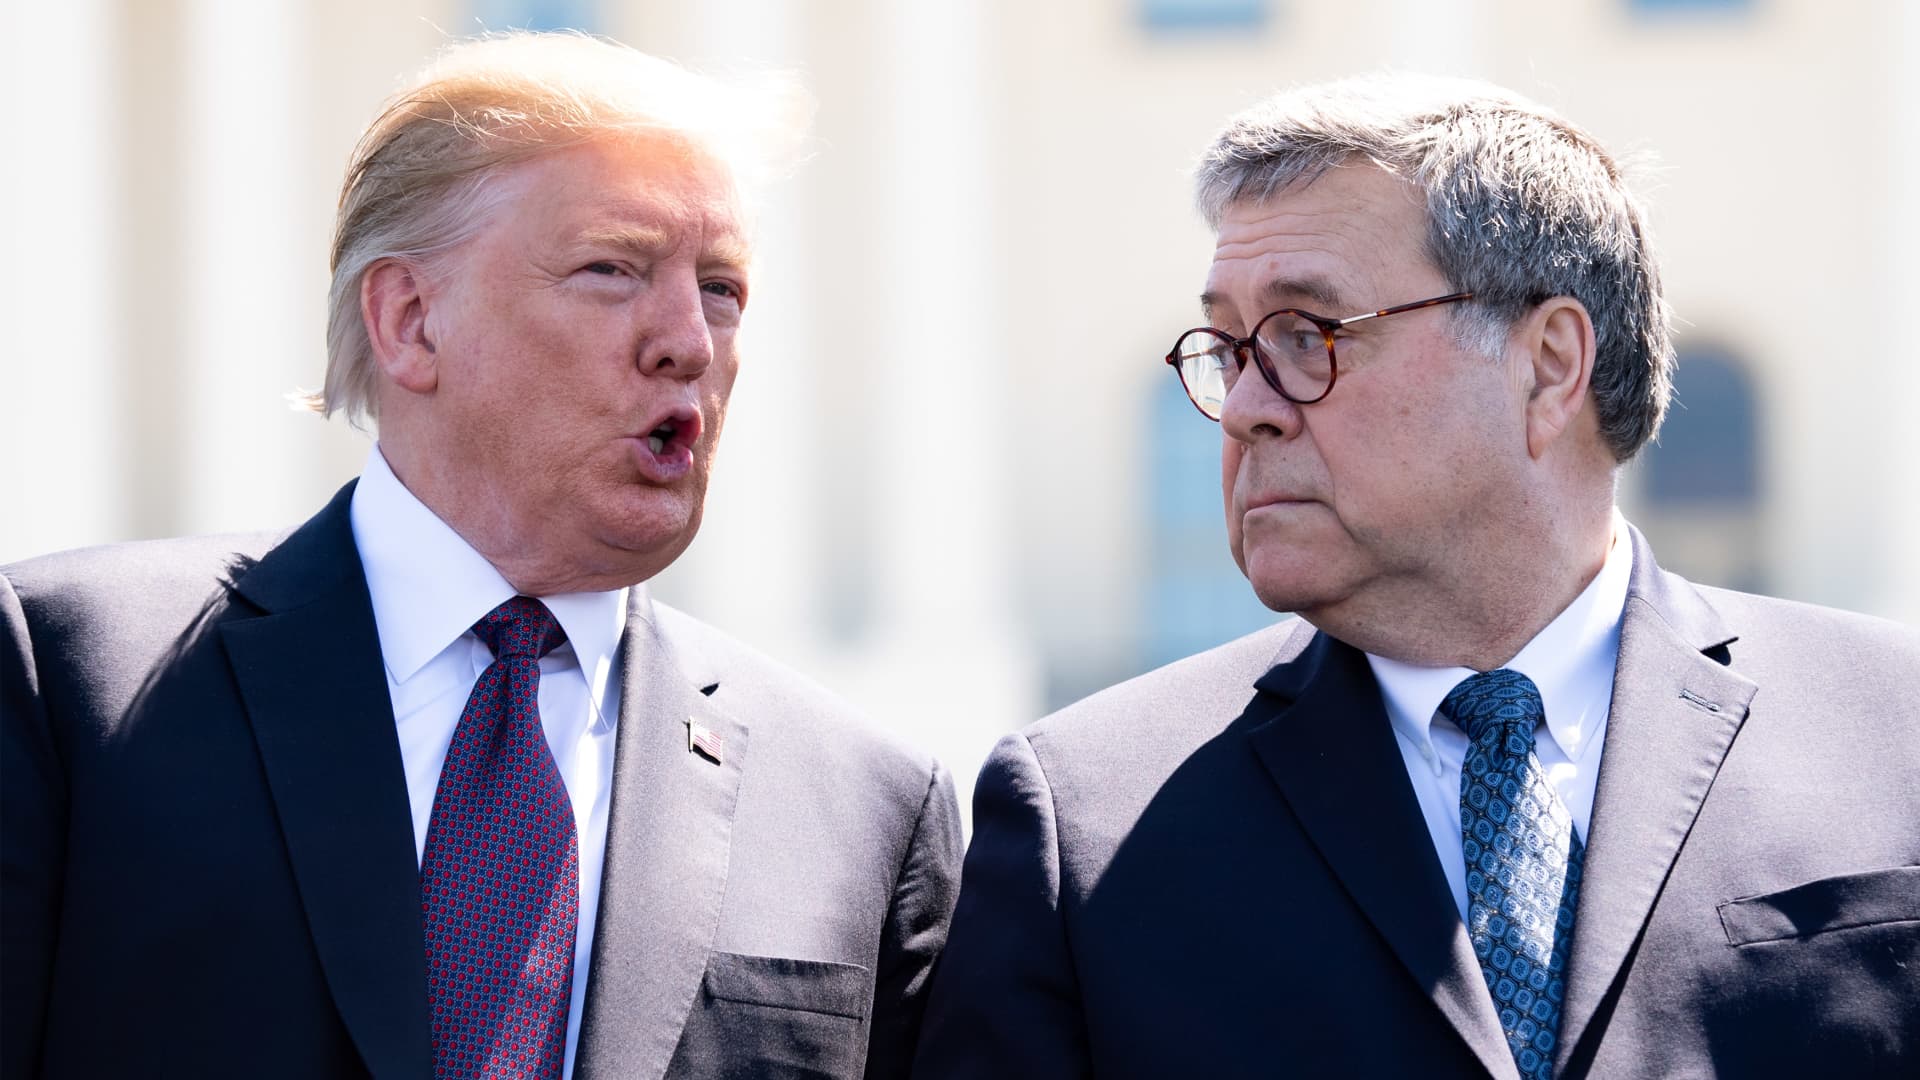 U.S. President Donald Trump, left, speaks to William Barr, U.S. attorney general, during the 38th annual National Peace Officers Memorial Day service at the U.S. Capitol in Washington, D.C., May 15, 2019.